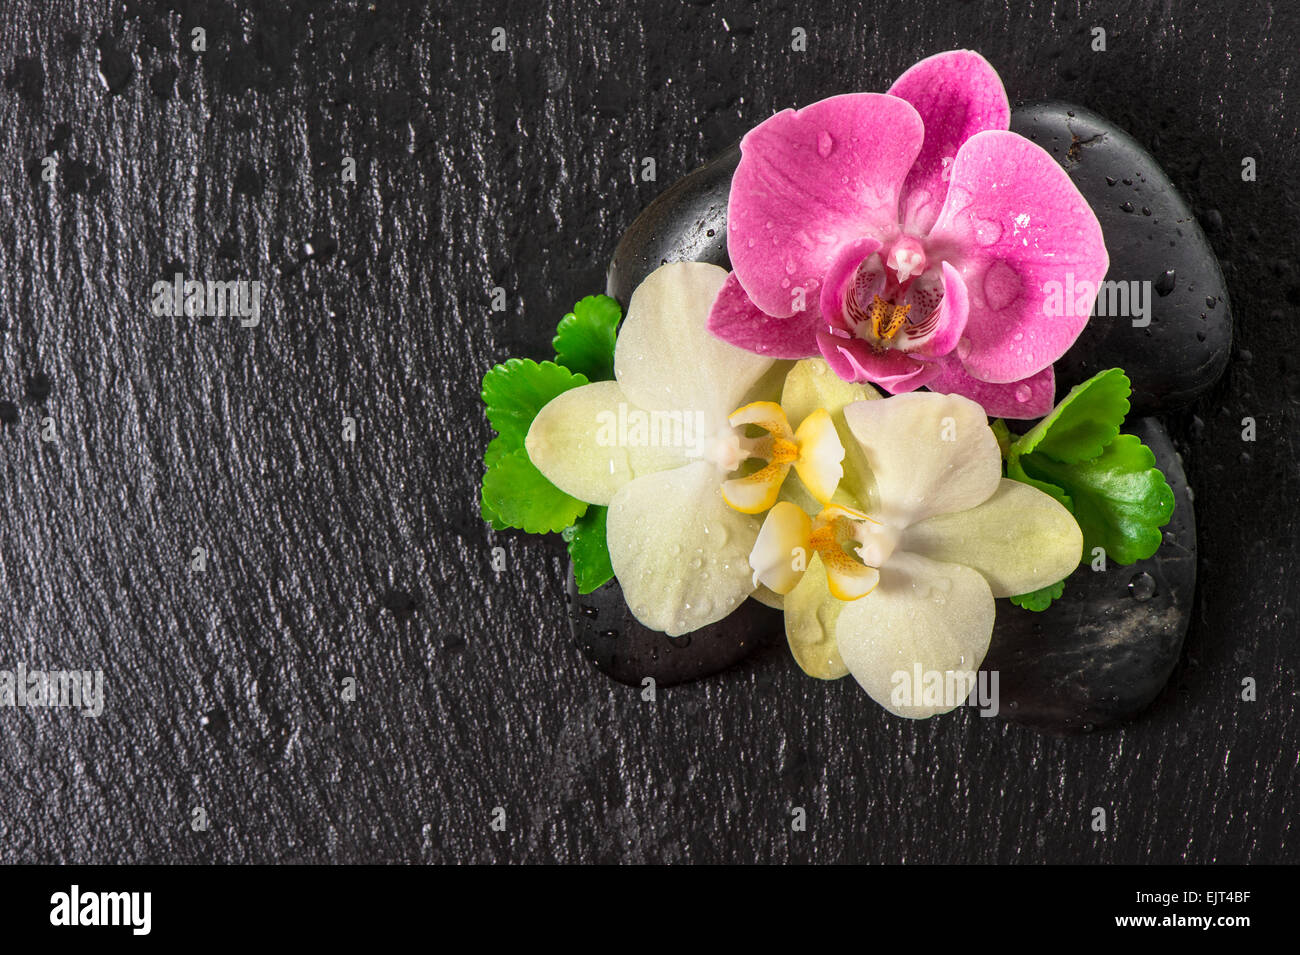 Spa concept with orchid flowers and green leaves on black background Stock Photo